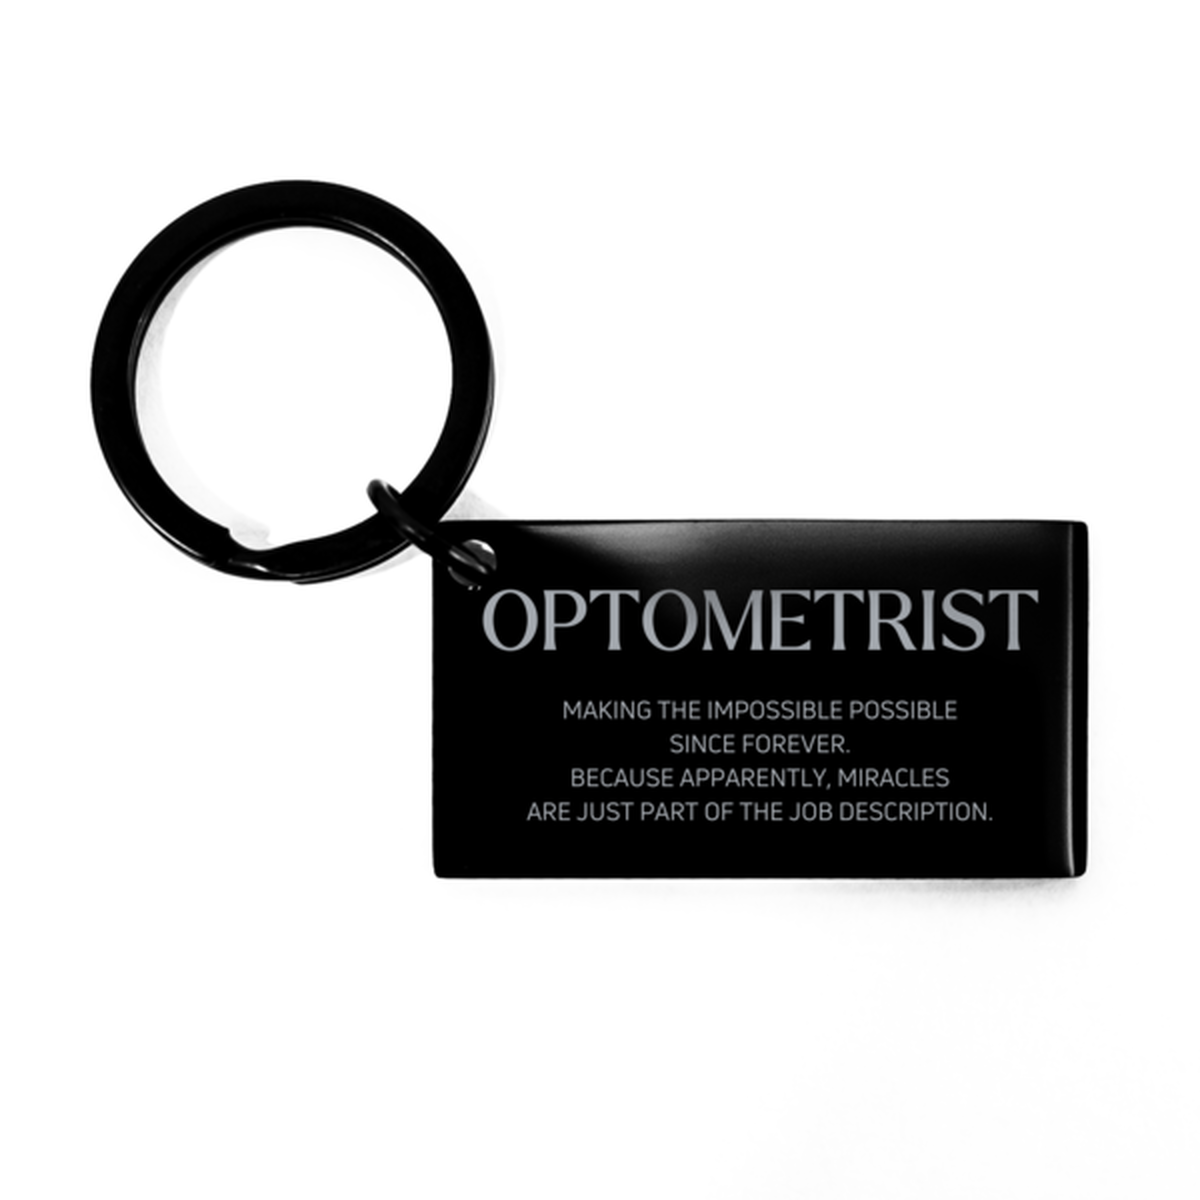 Funny Optometrist Gifts, Miracles are just part of the job description, Inspirational Birthday Keychain For Optometrist, Men, Women, Coworkers, Friends, Boss